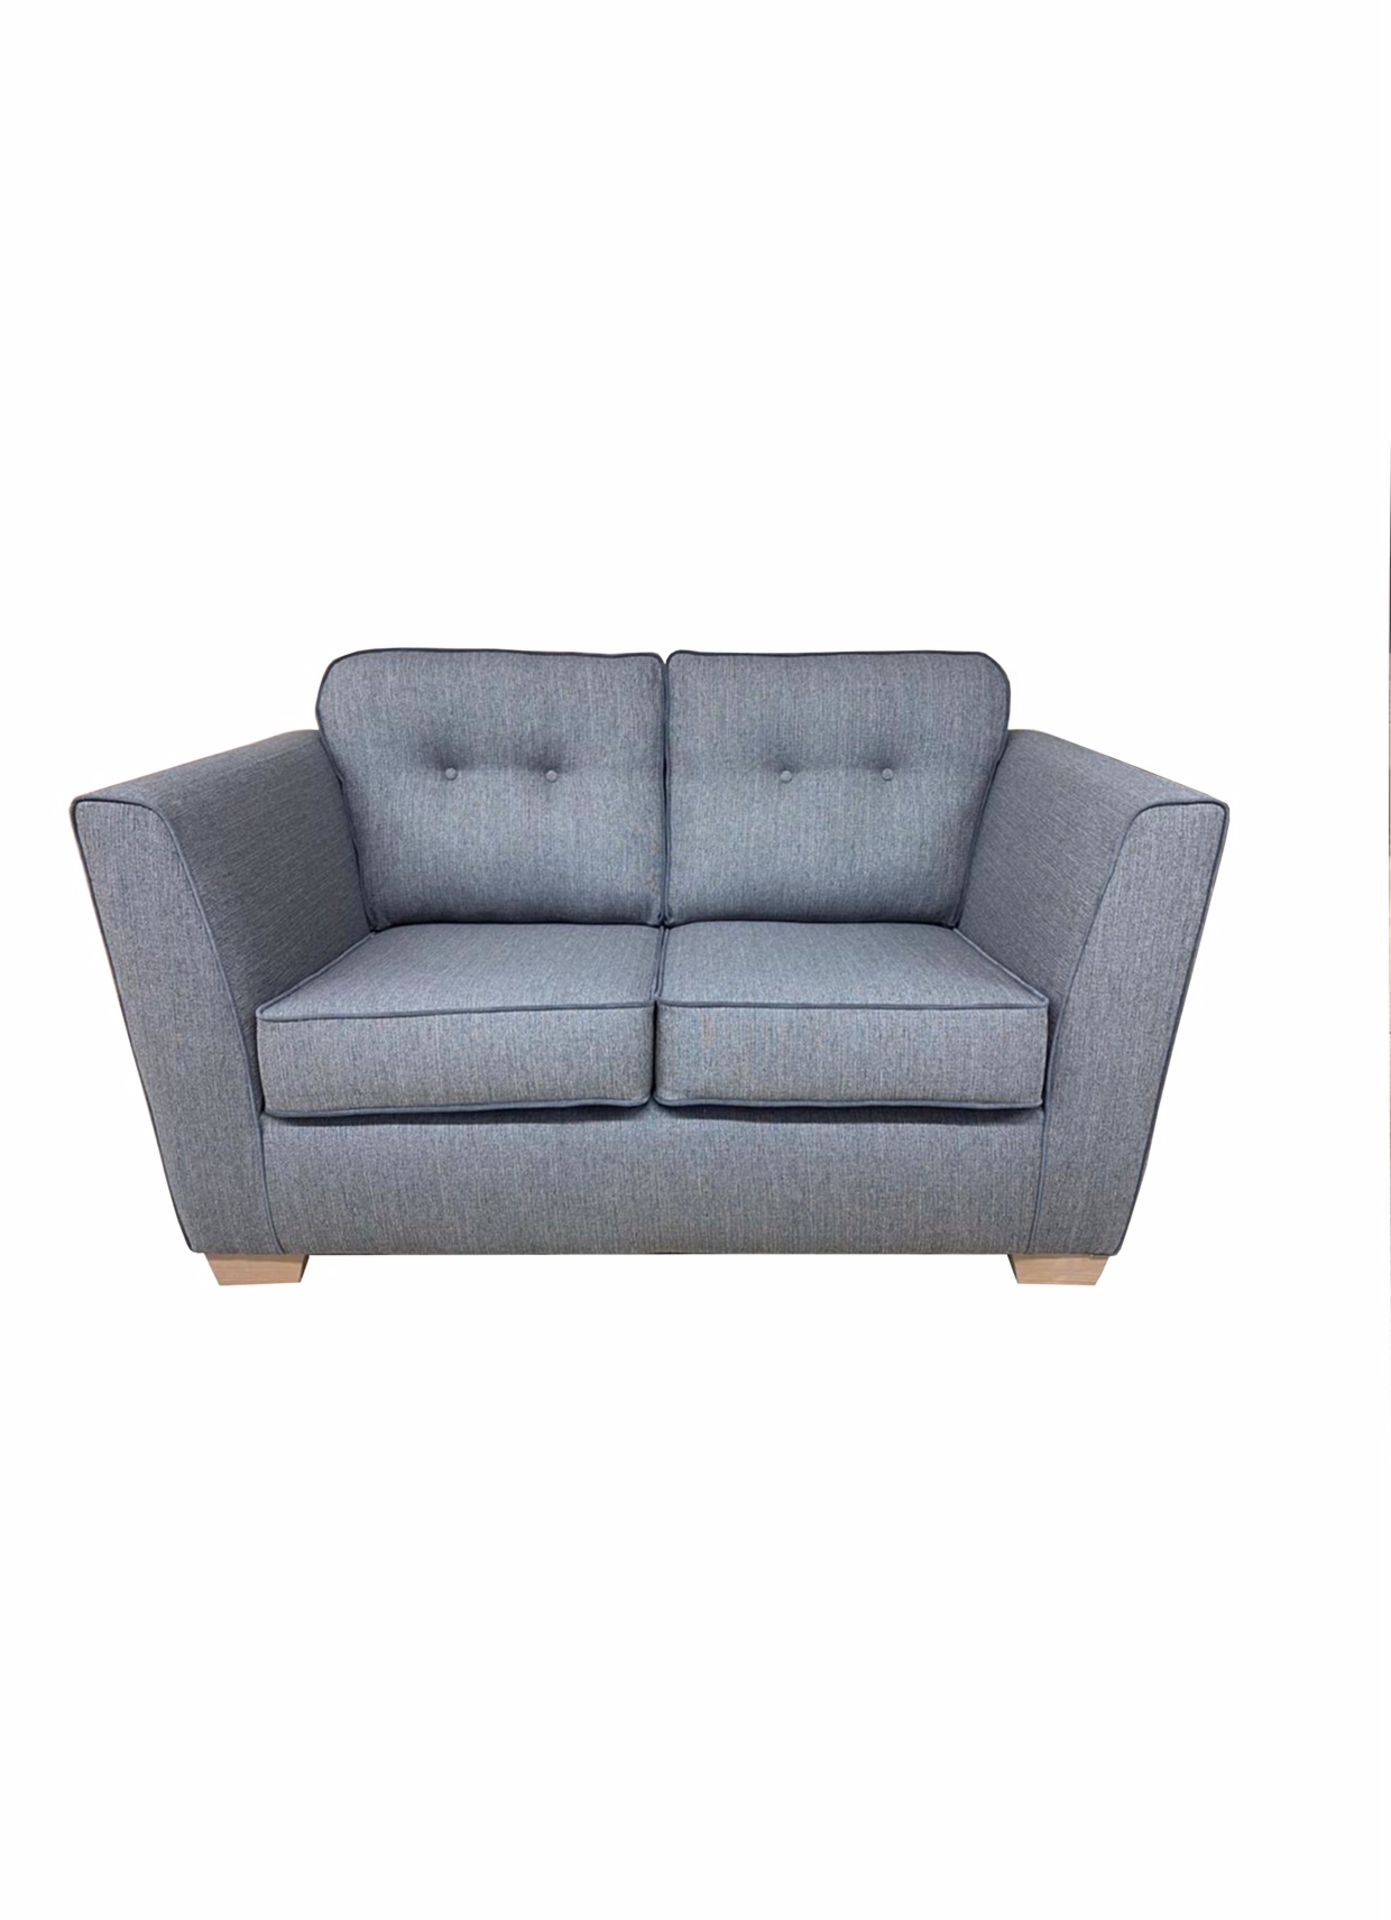 Brand new Dorset 3 seater plus 2 seater luxury fabric sofas in grey - Image 2 of 2